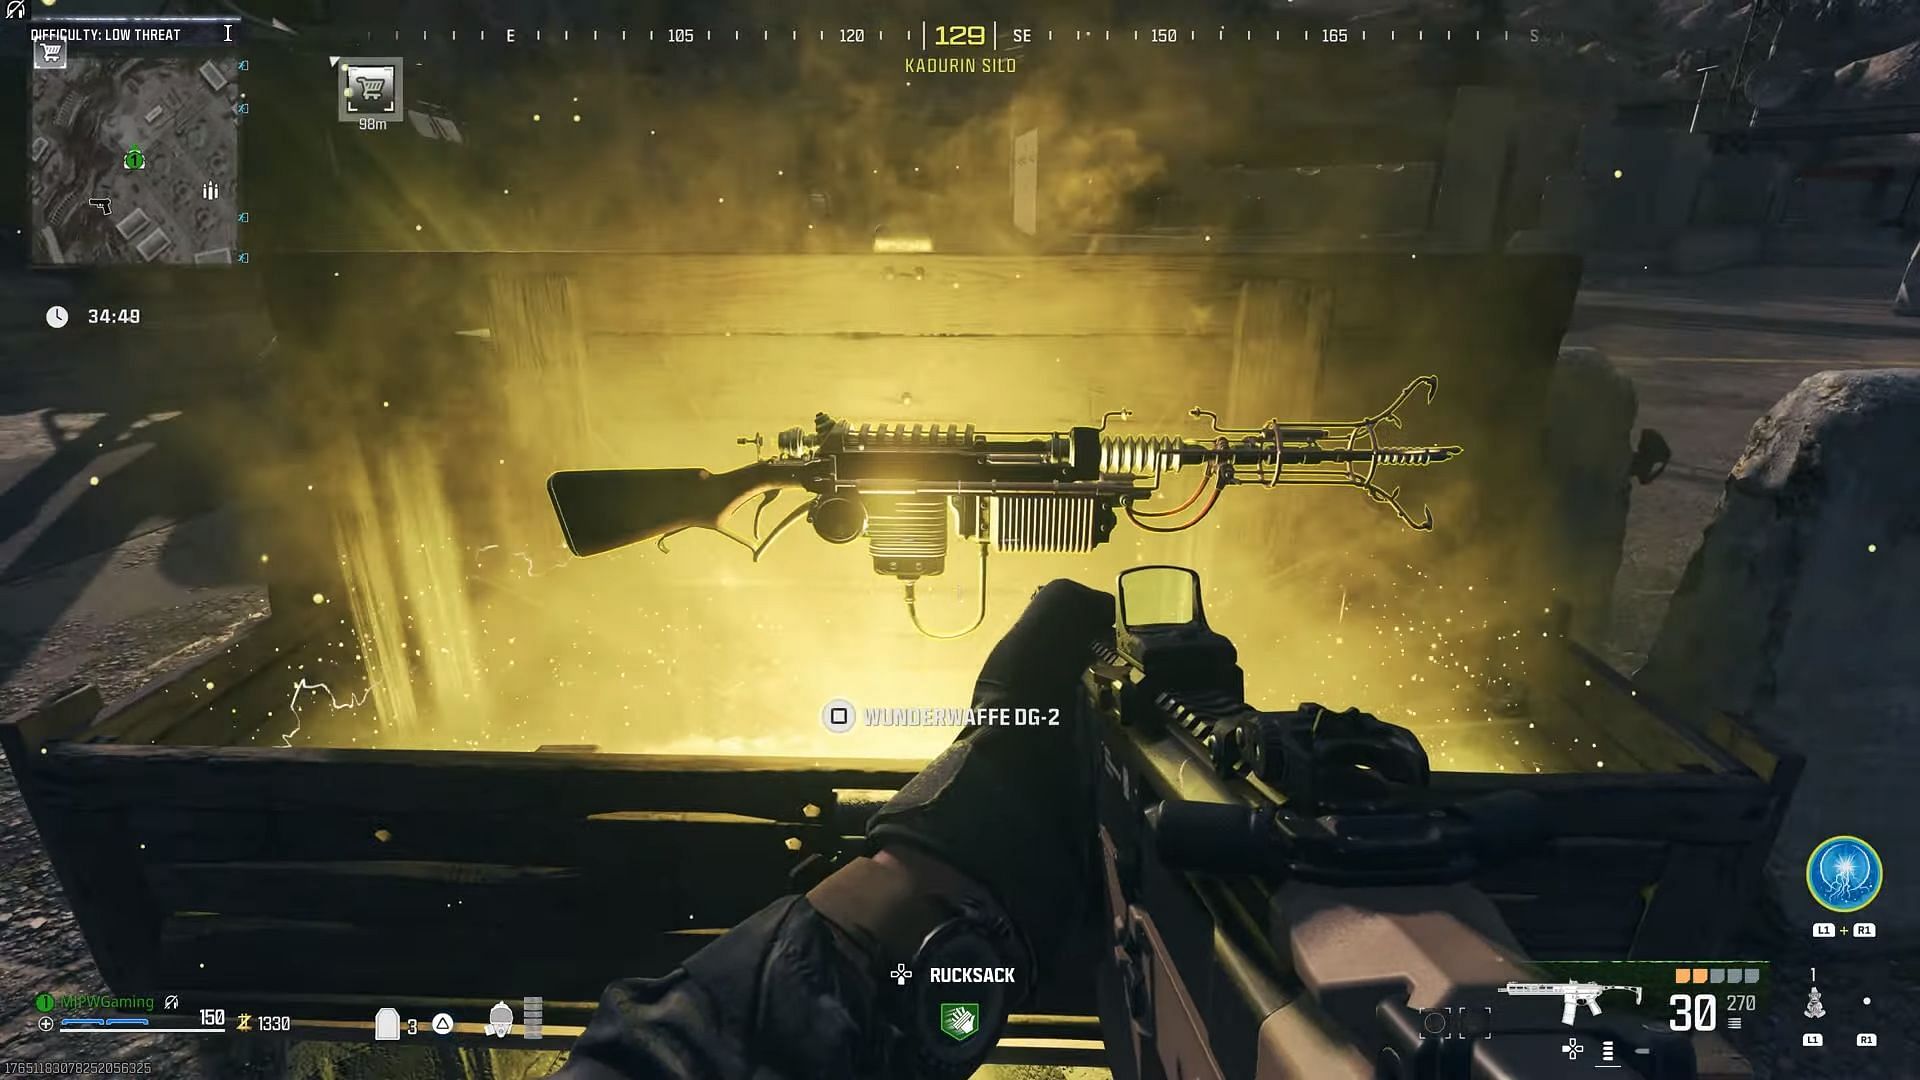 Finding a Wunderwaffe DG-2 inside a Mystery Box in MW3 Zombies (Image via @MJPW on YouTube/Activision)